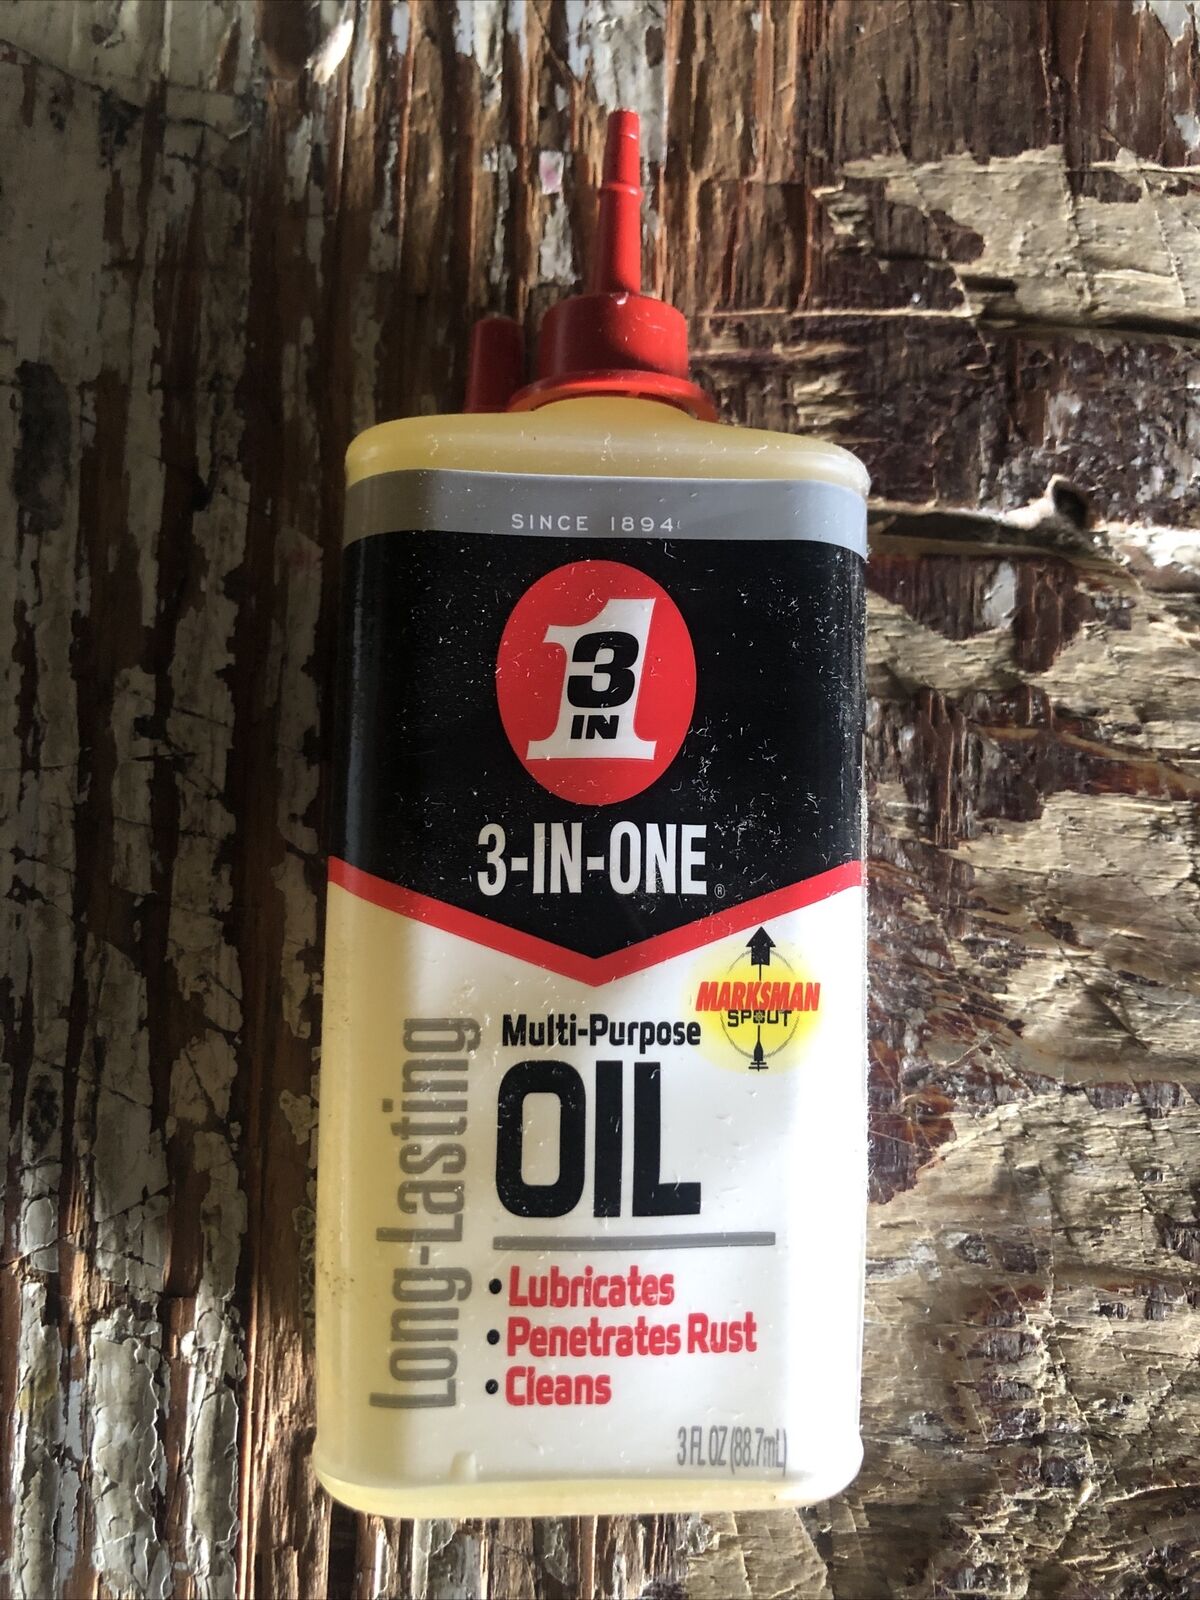 3-IN-ONE Multi-Purpose Oil - Trusted Tool, Precise Application - 3 OZ, 1-pack